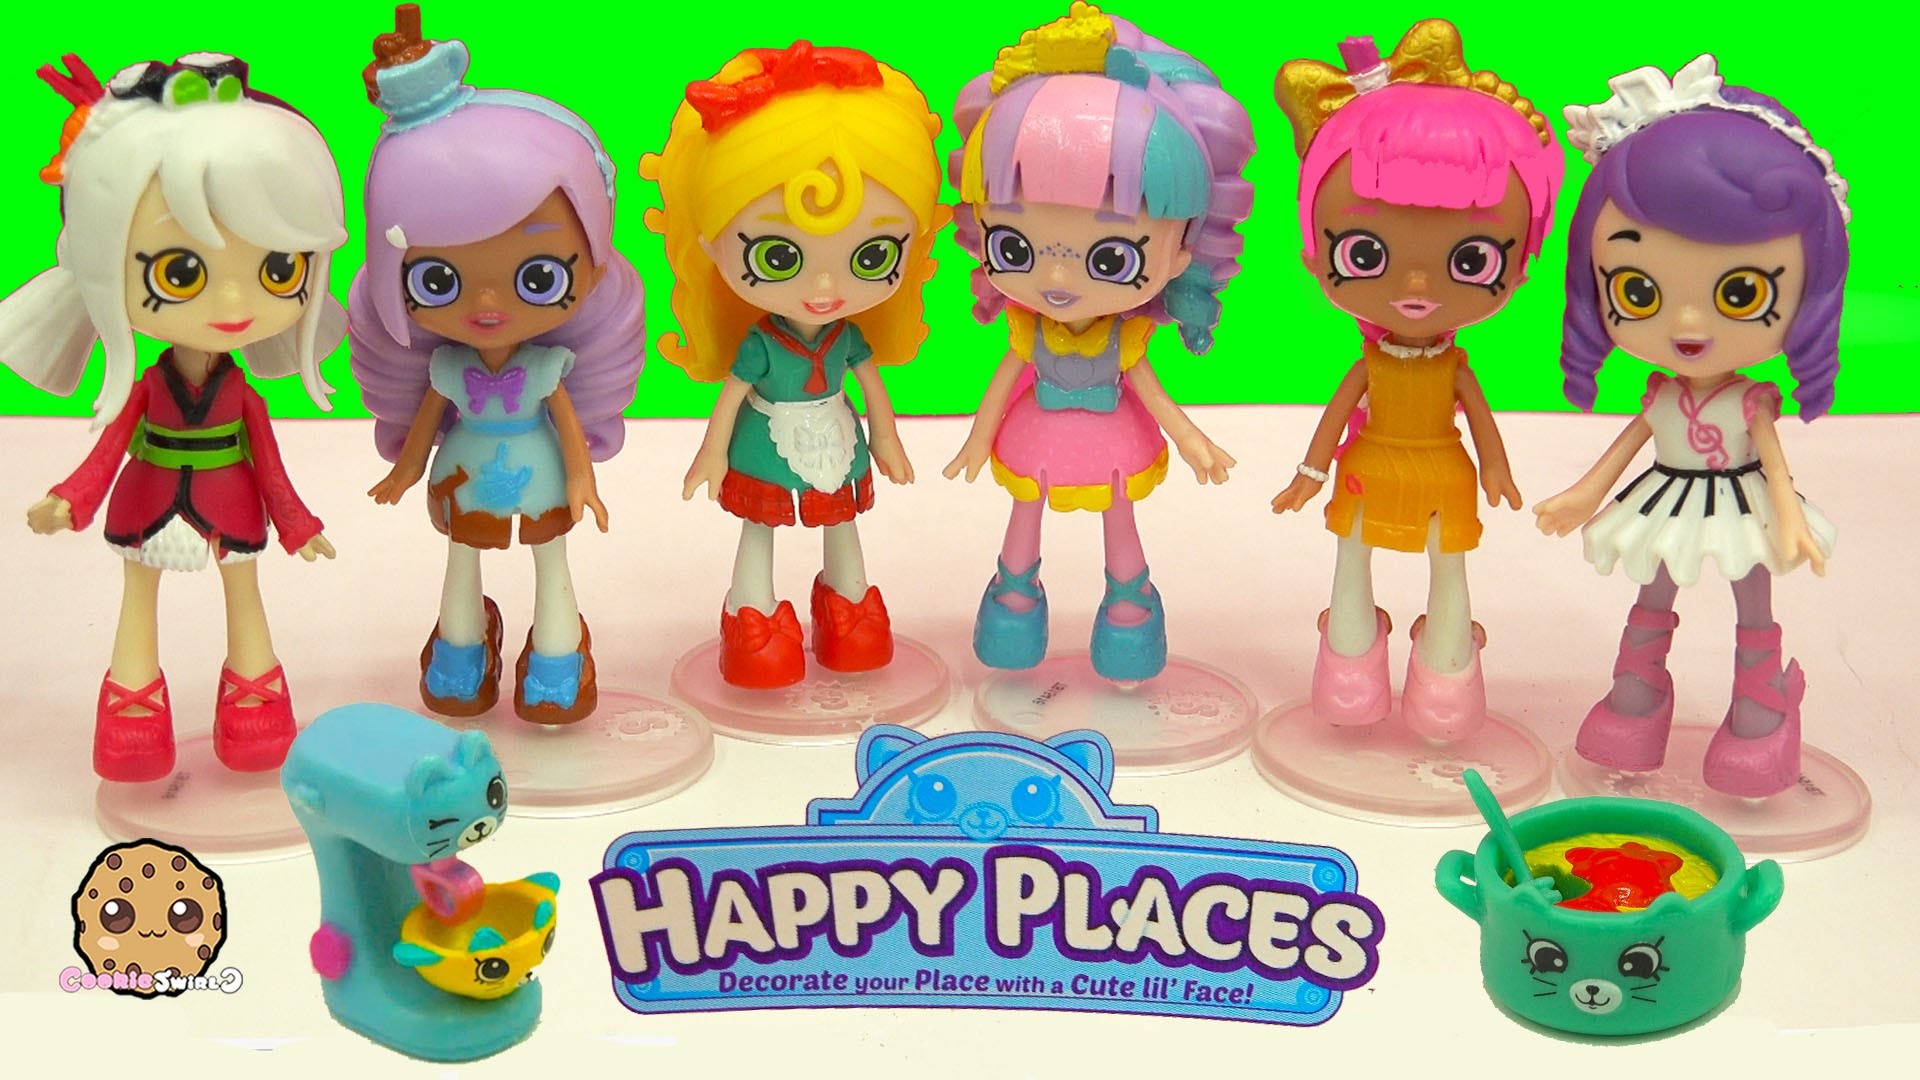 1920x1080 Full Set of 6 Shoppies Mini Dolls with Exclusive Happy Places Shopkins -  Toys - YouTube